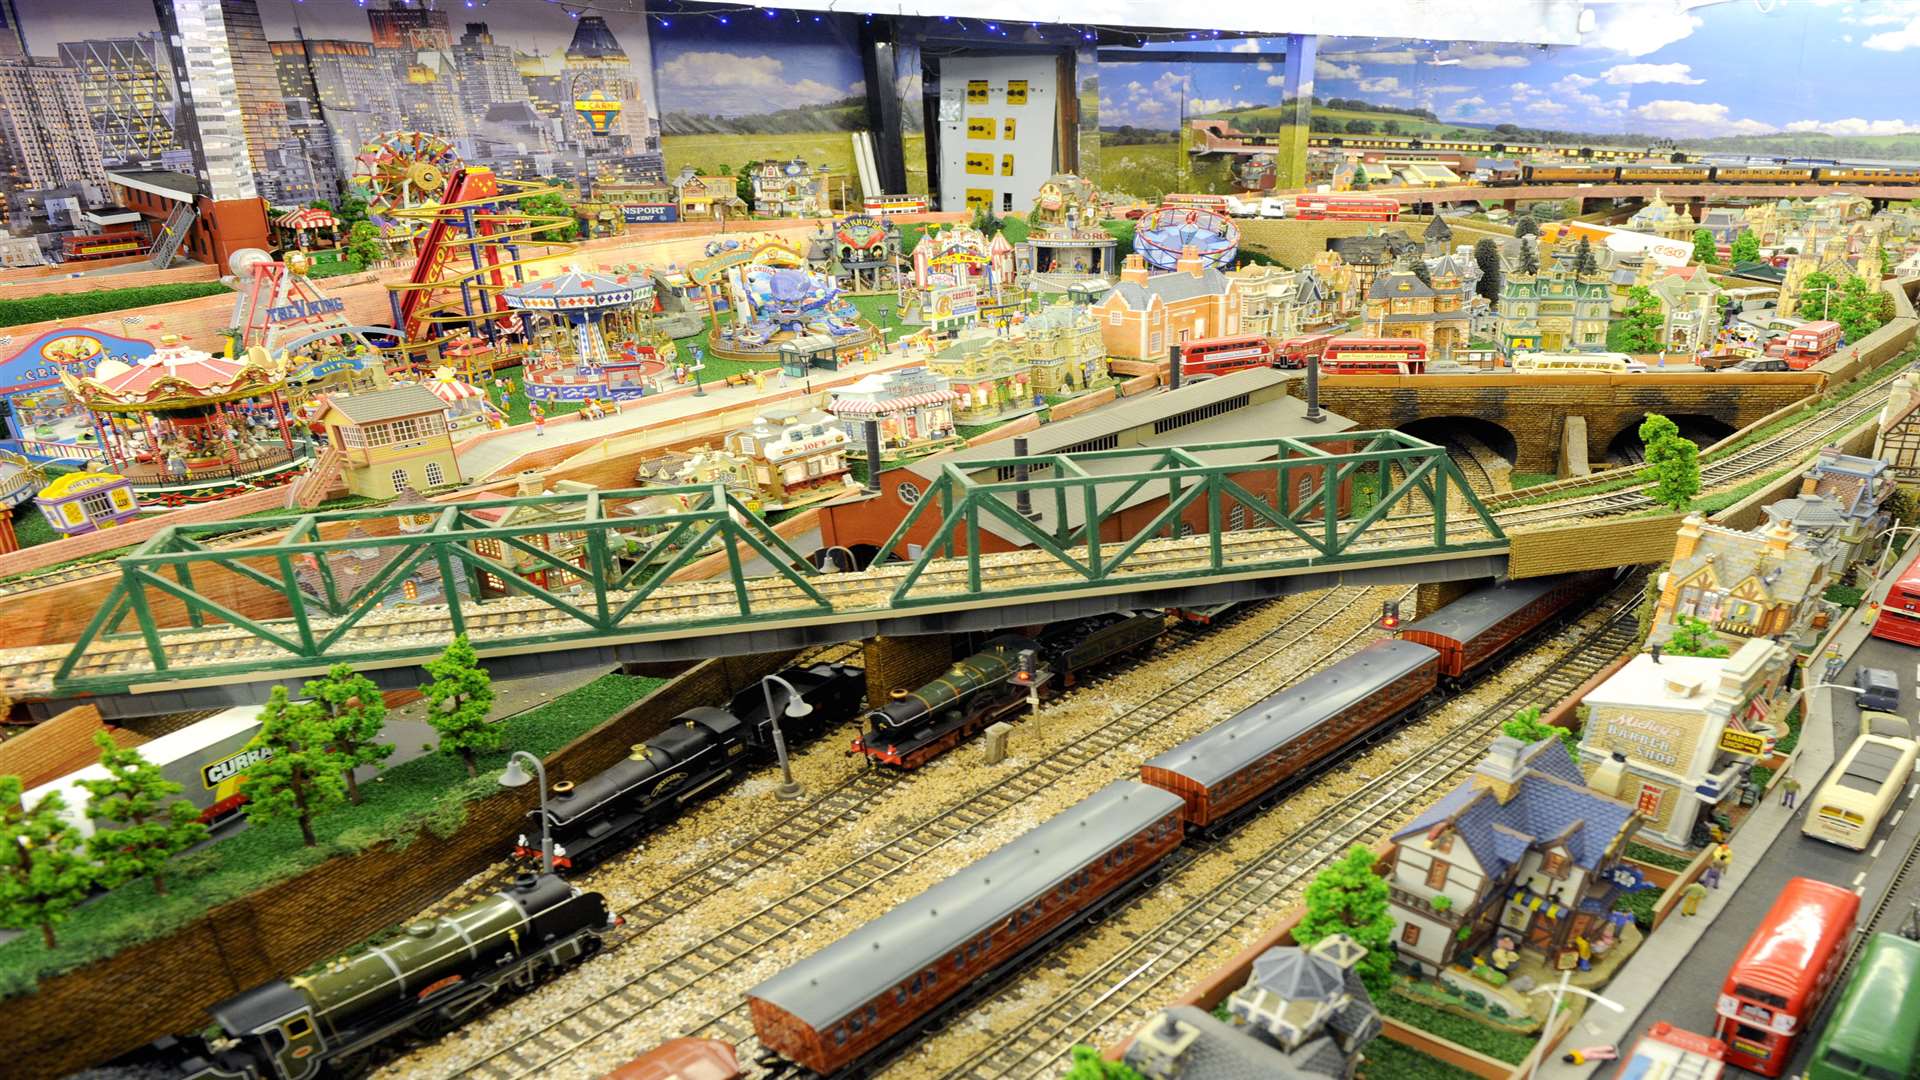 The set up is thought to be one of biggest zero-gauge miniature layouts in the country. Picture: Simon Hildrew